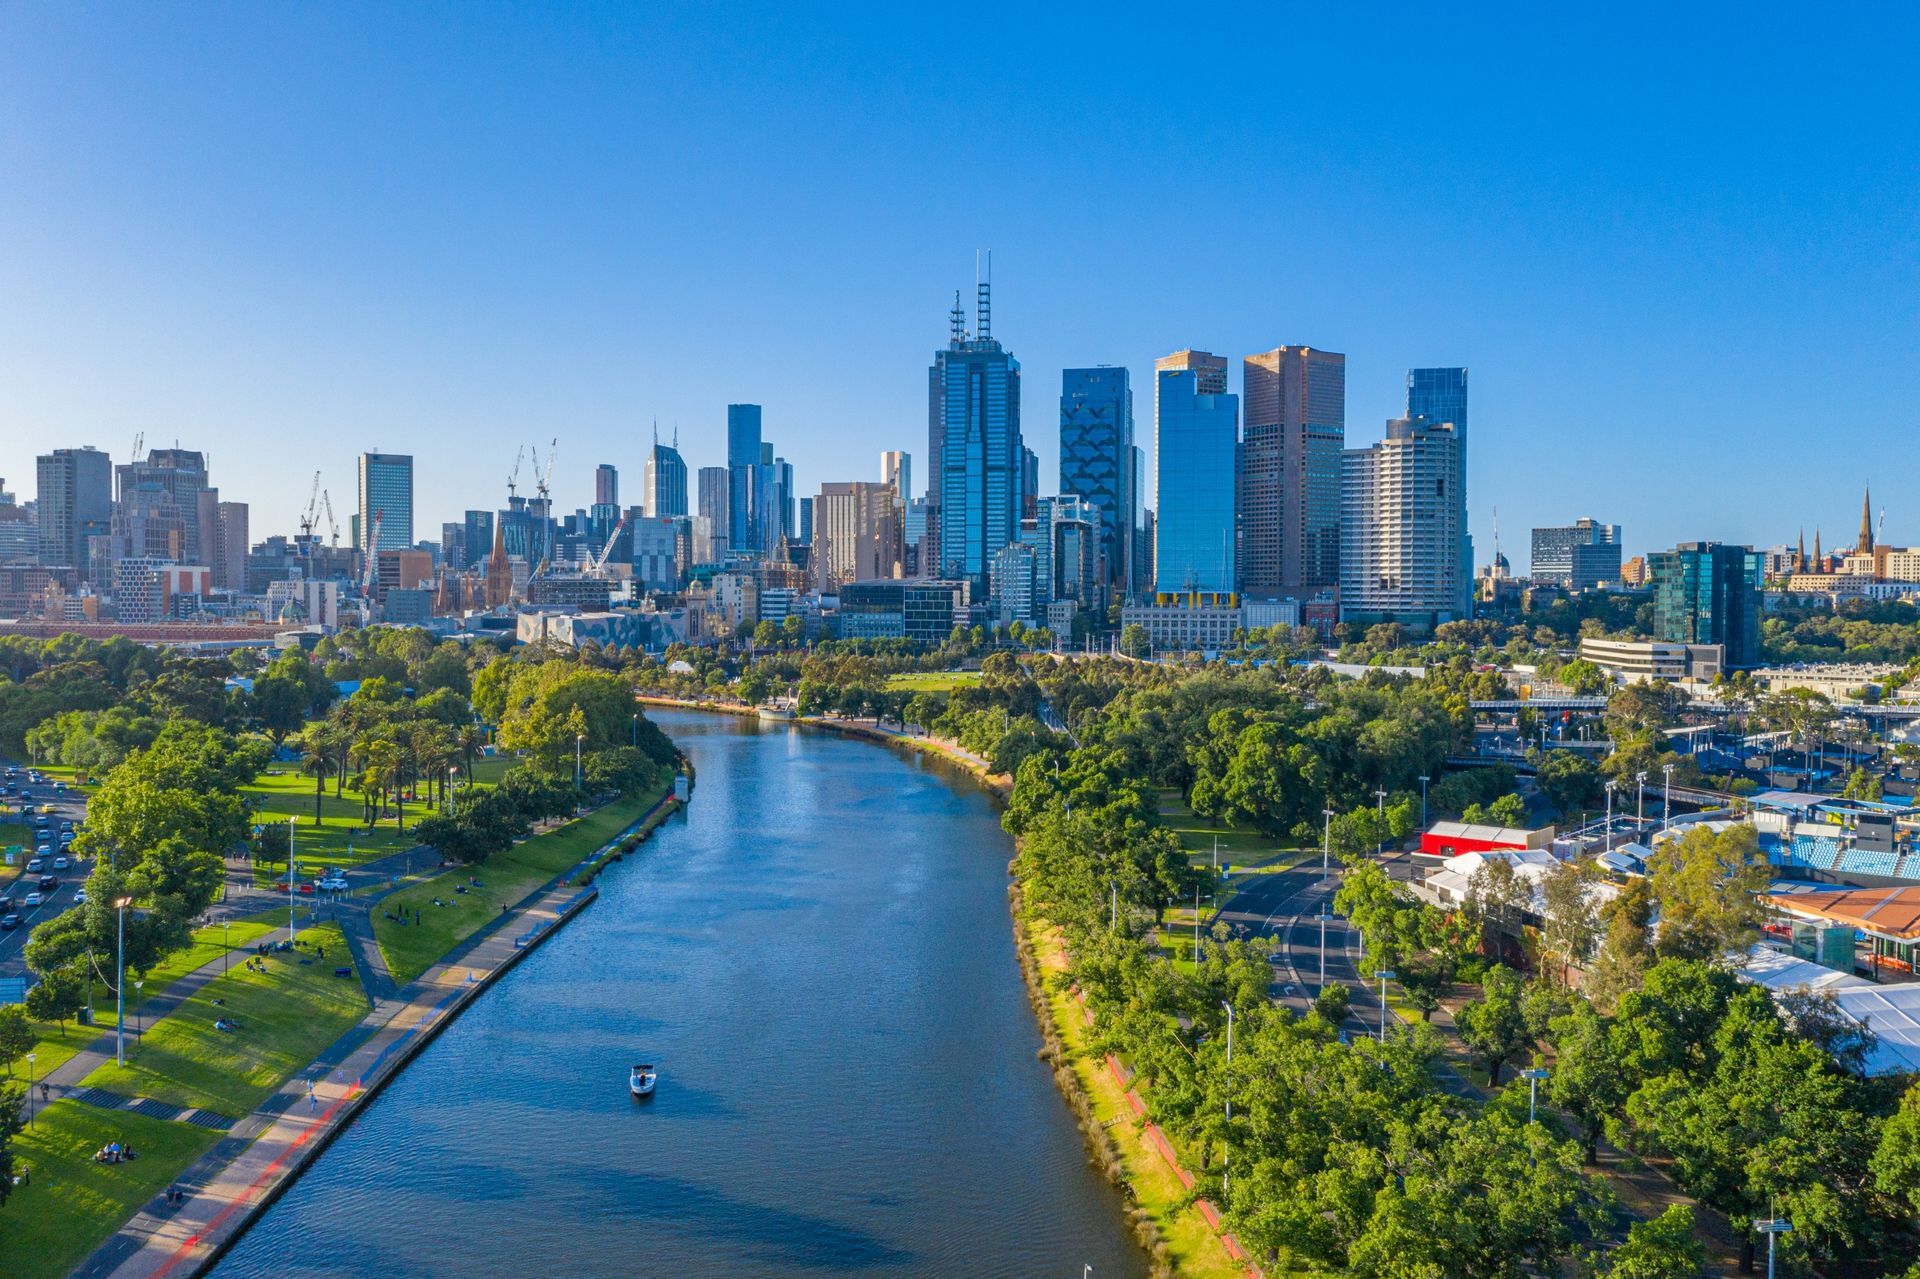 Image depicts the City of Melbourne Skyline from the Yarra River